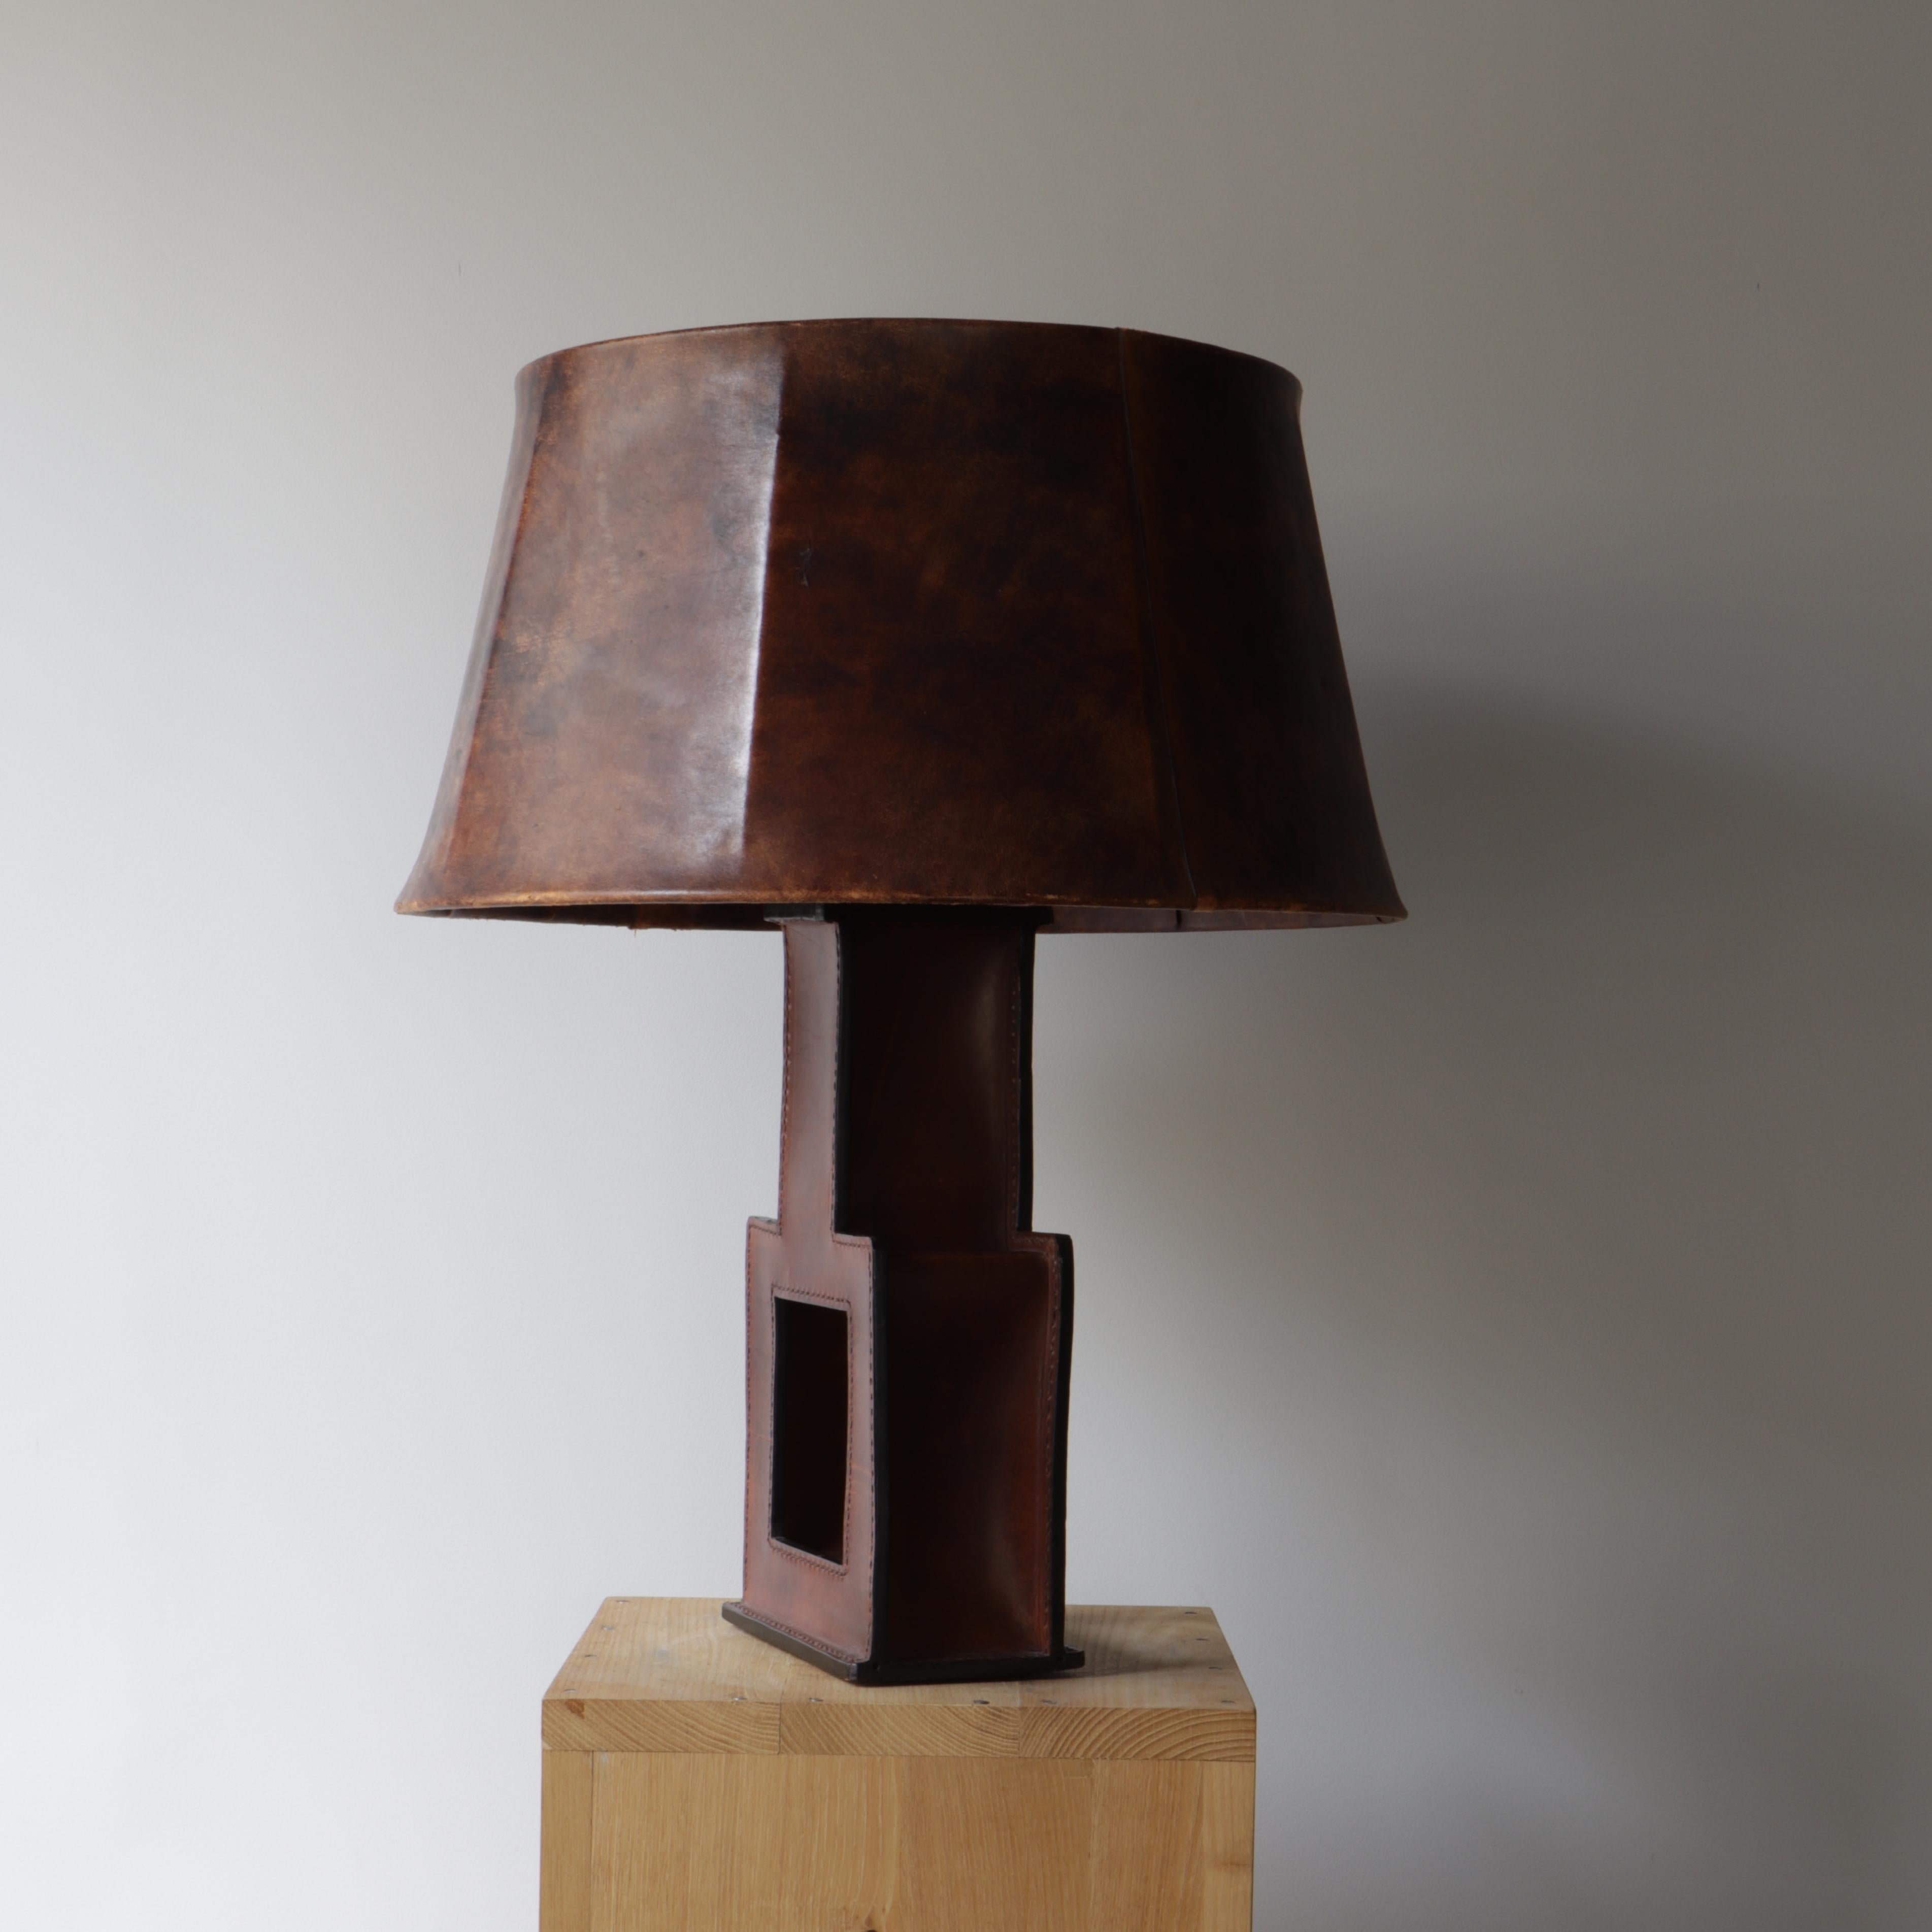 French work dating from the second half of the 20th century. This lamp in the shape of a pierced square carries from the lampshade to the foot its original leather sewn on stitching. It is covered with a nice patina. Presents minor traces of wear.